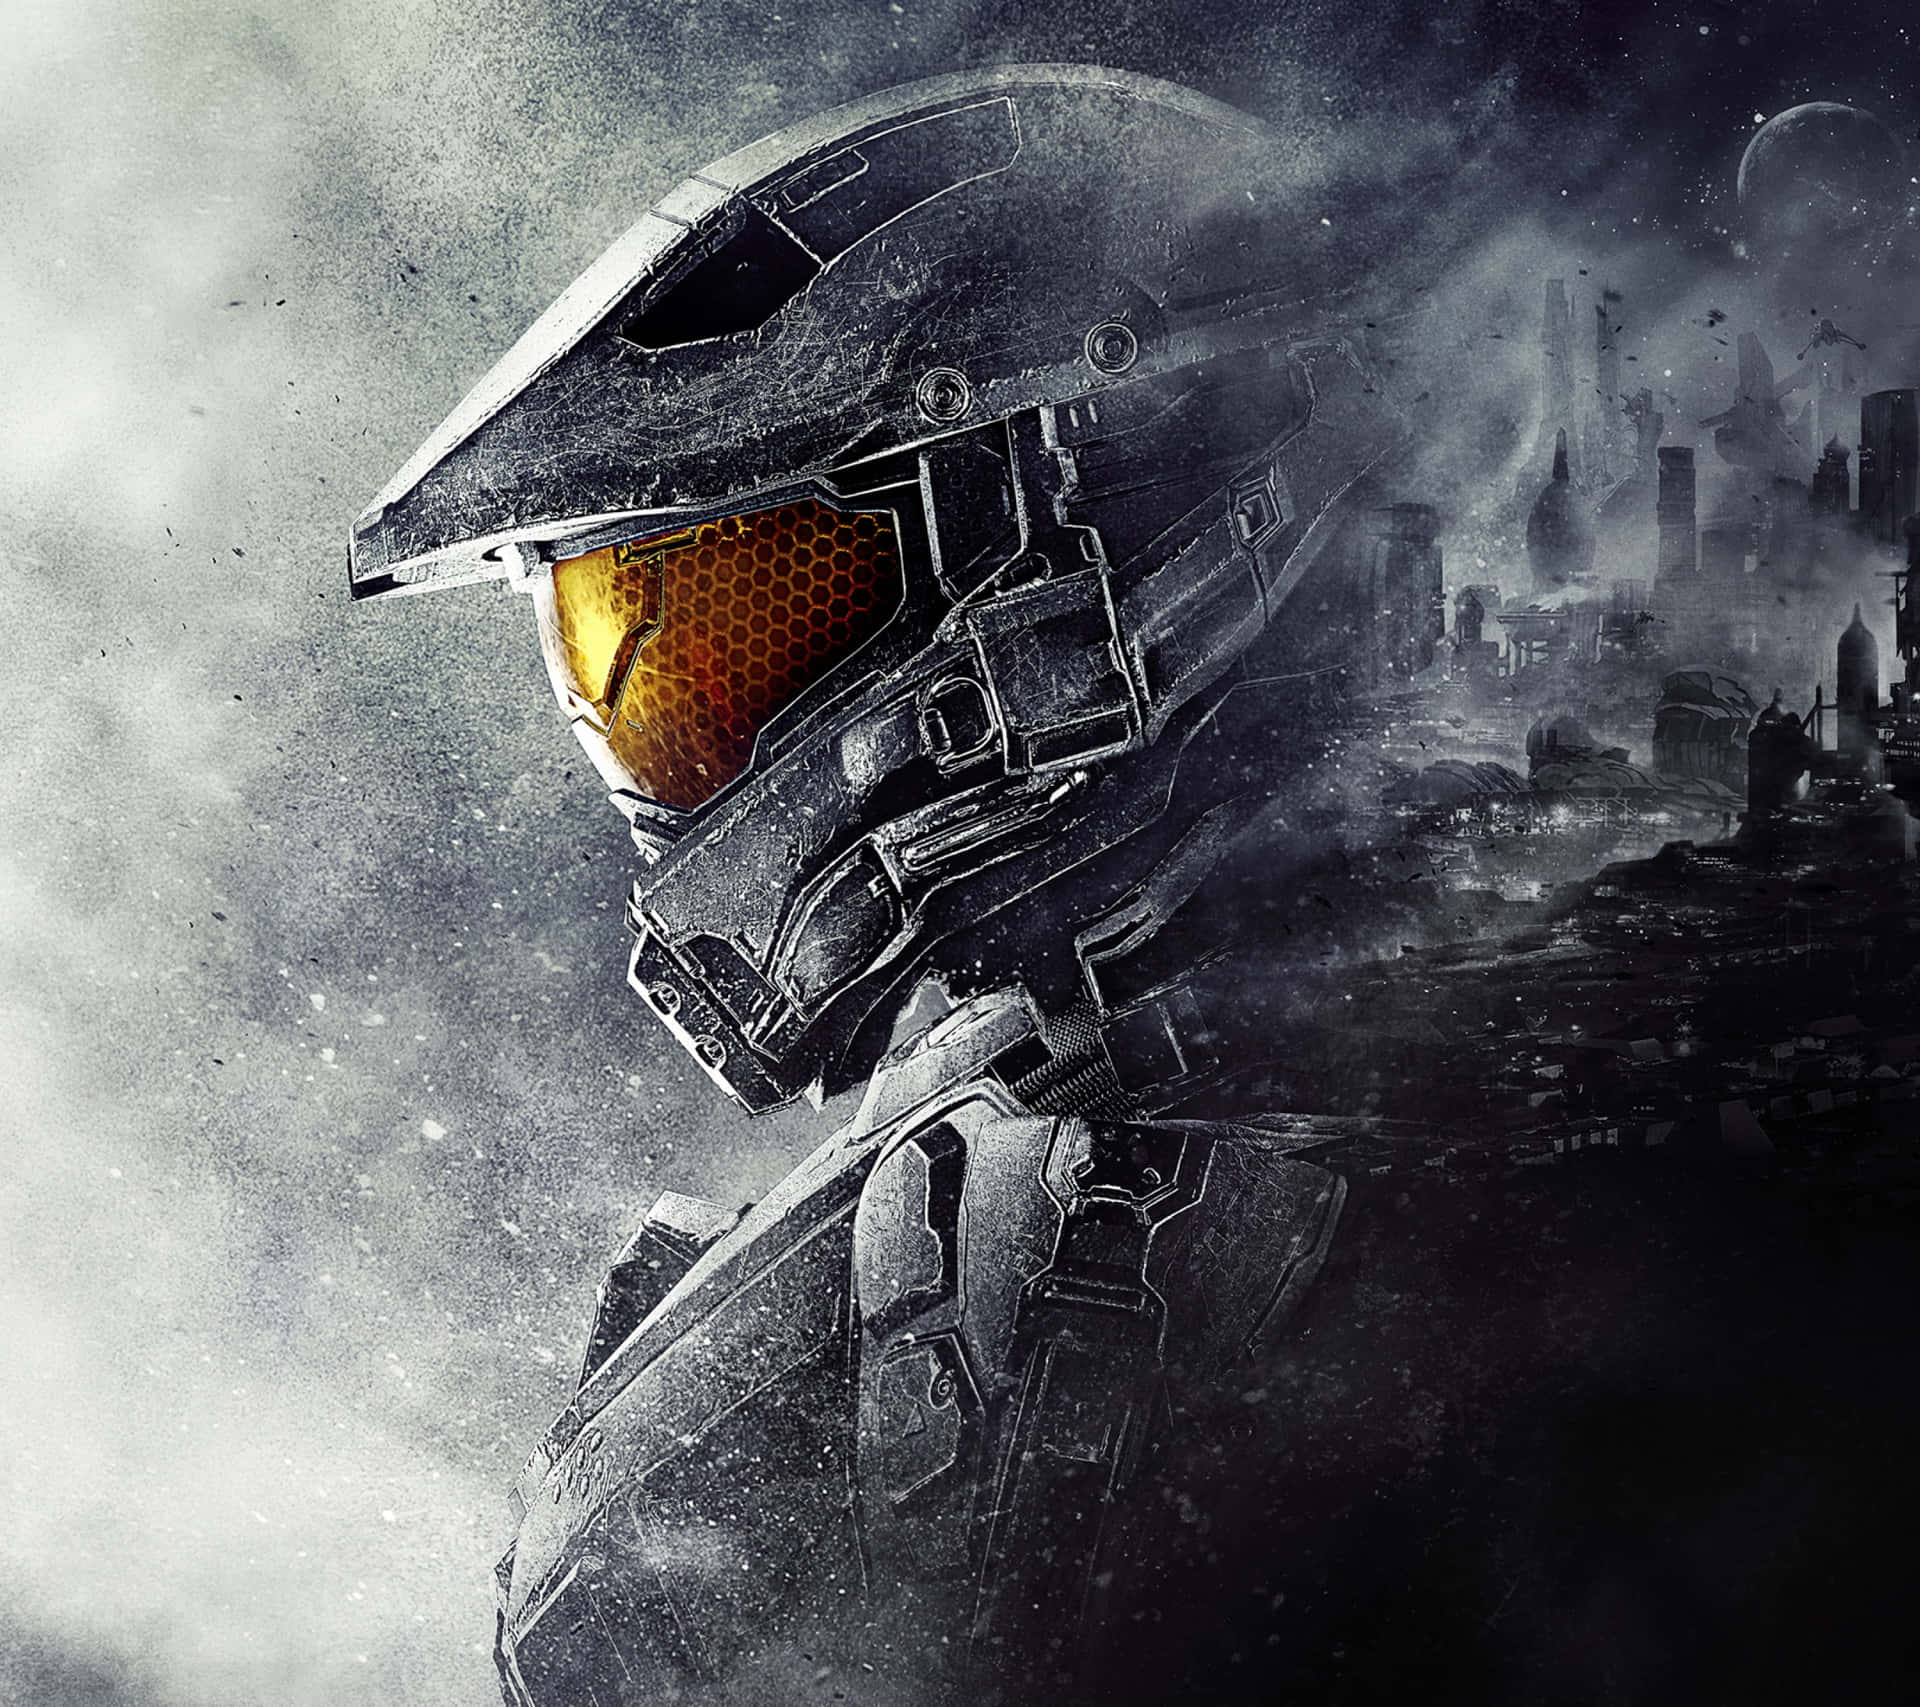 War continues as Master Chief leads the way